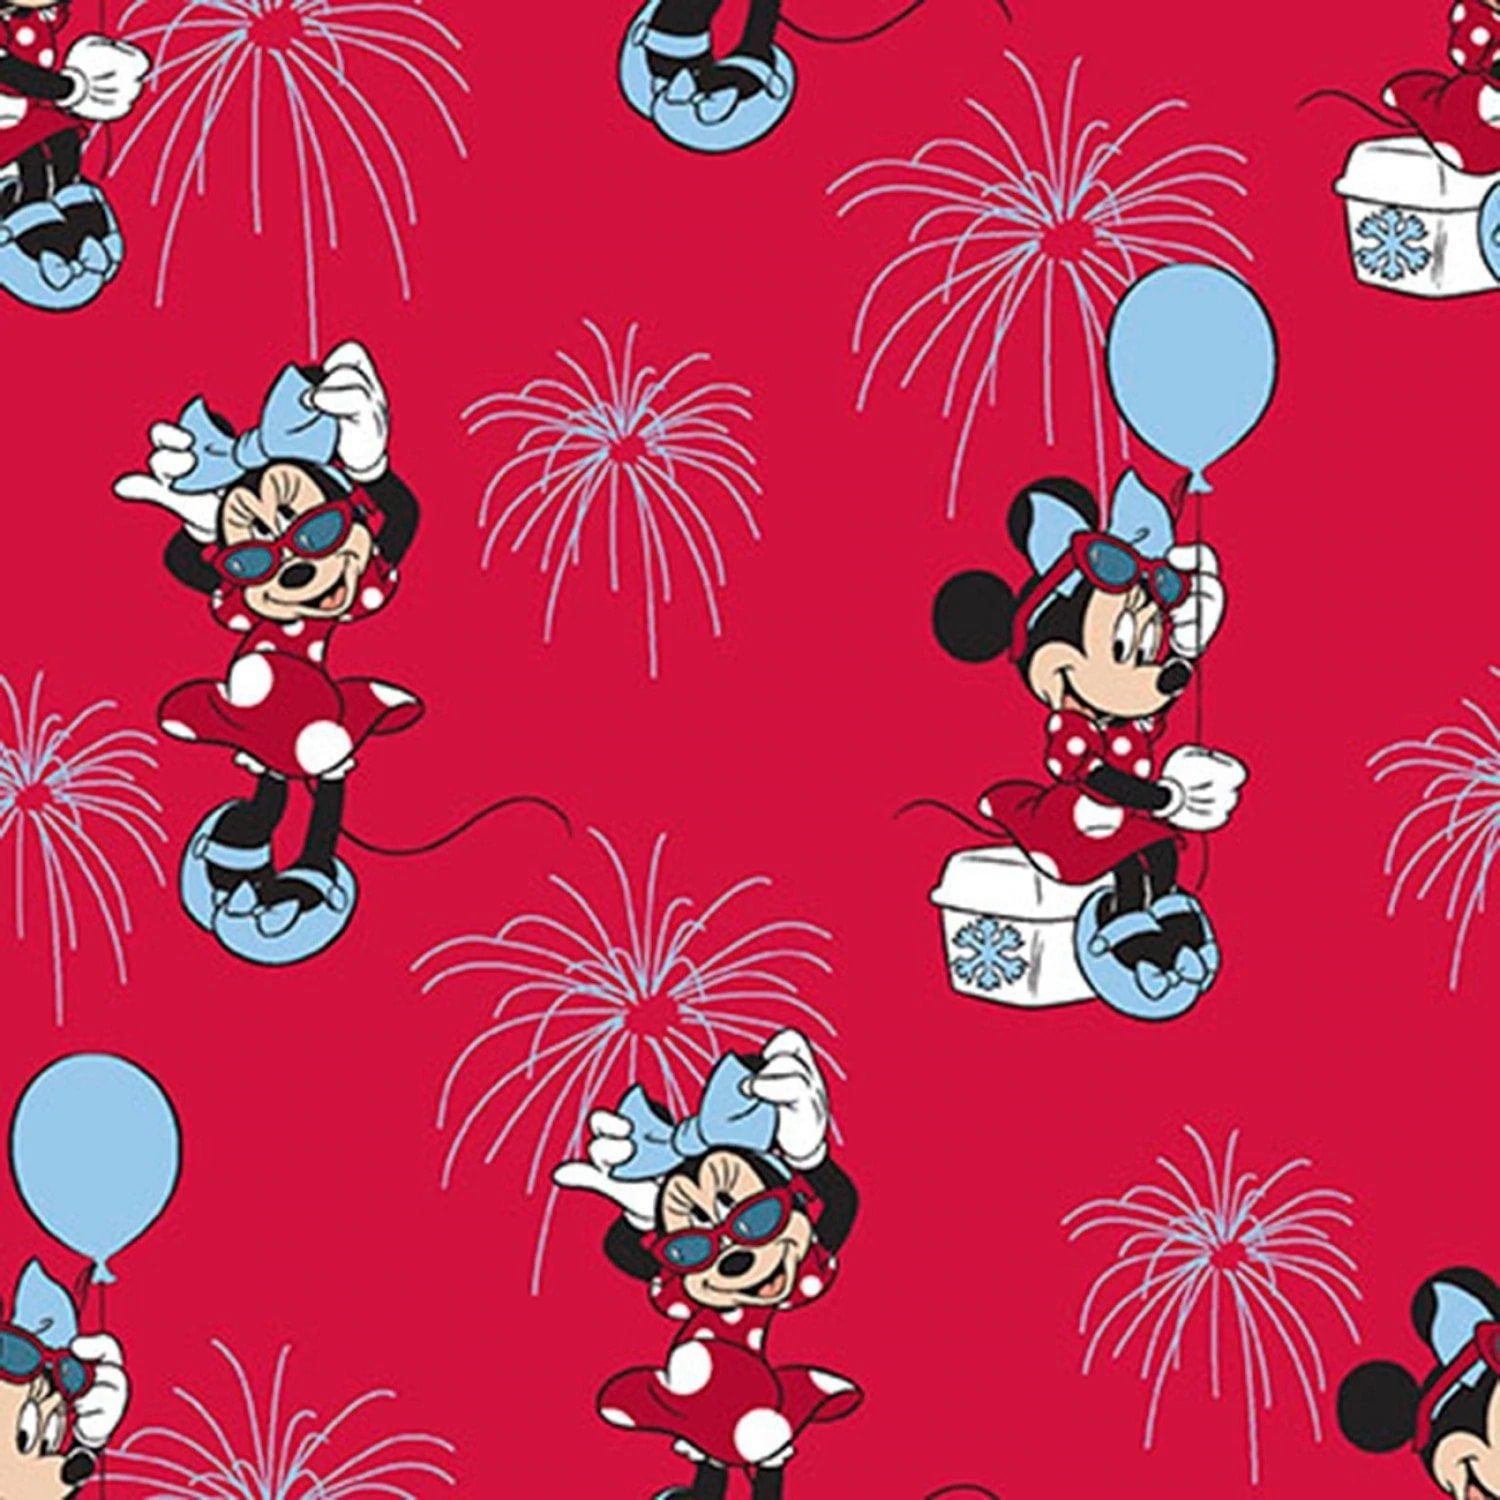 New Disney Mickey Mouse Red Black White Fabric Fleece Scarf  60" L 9" W 